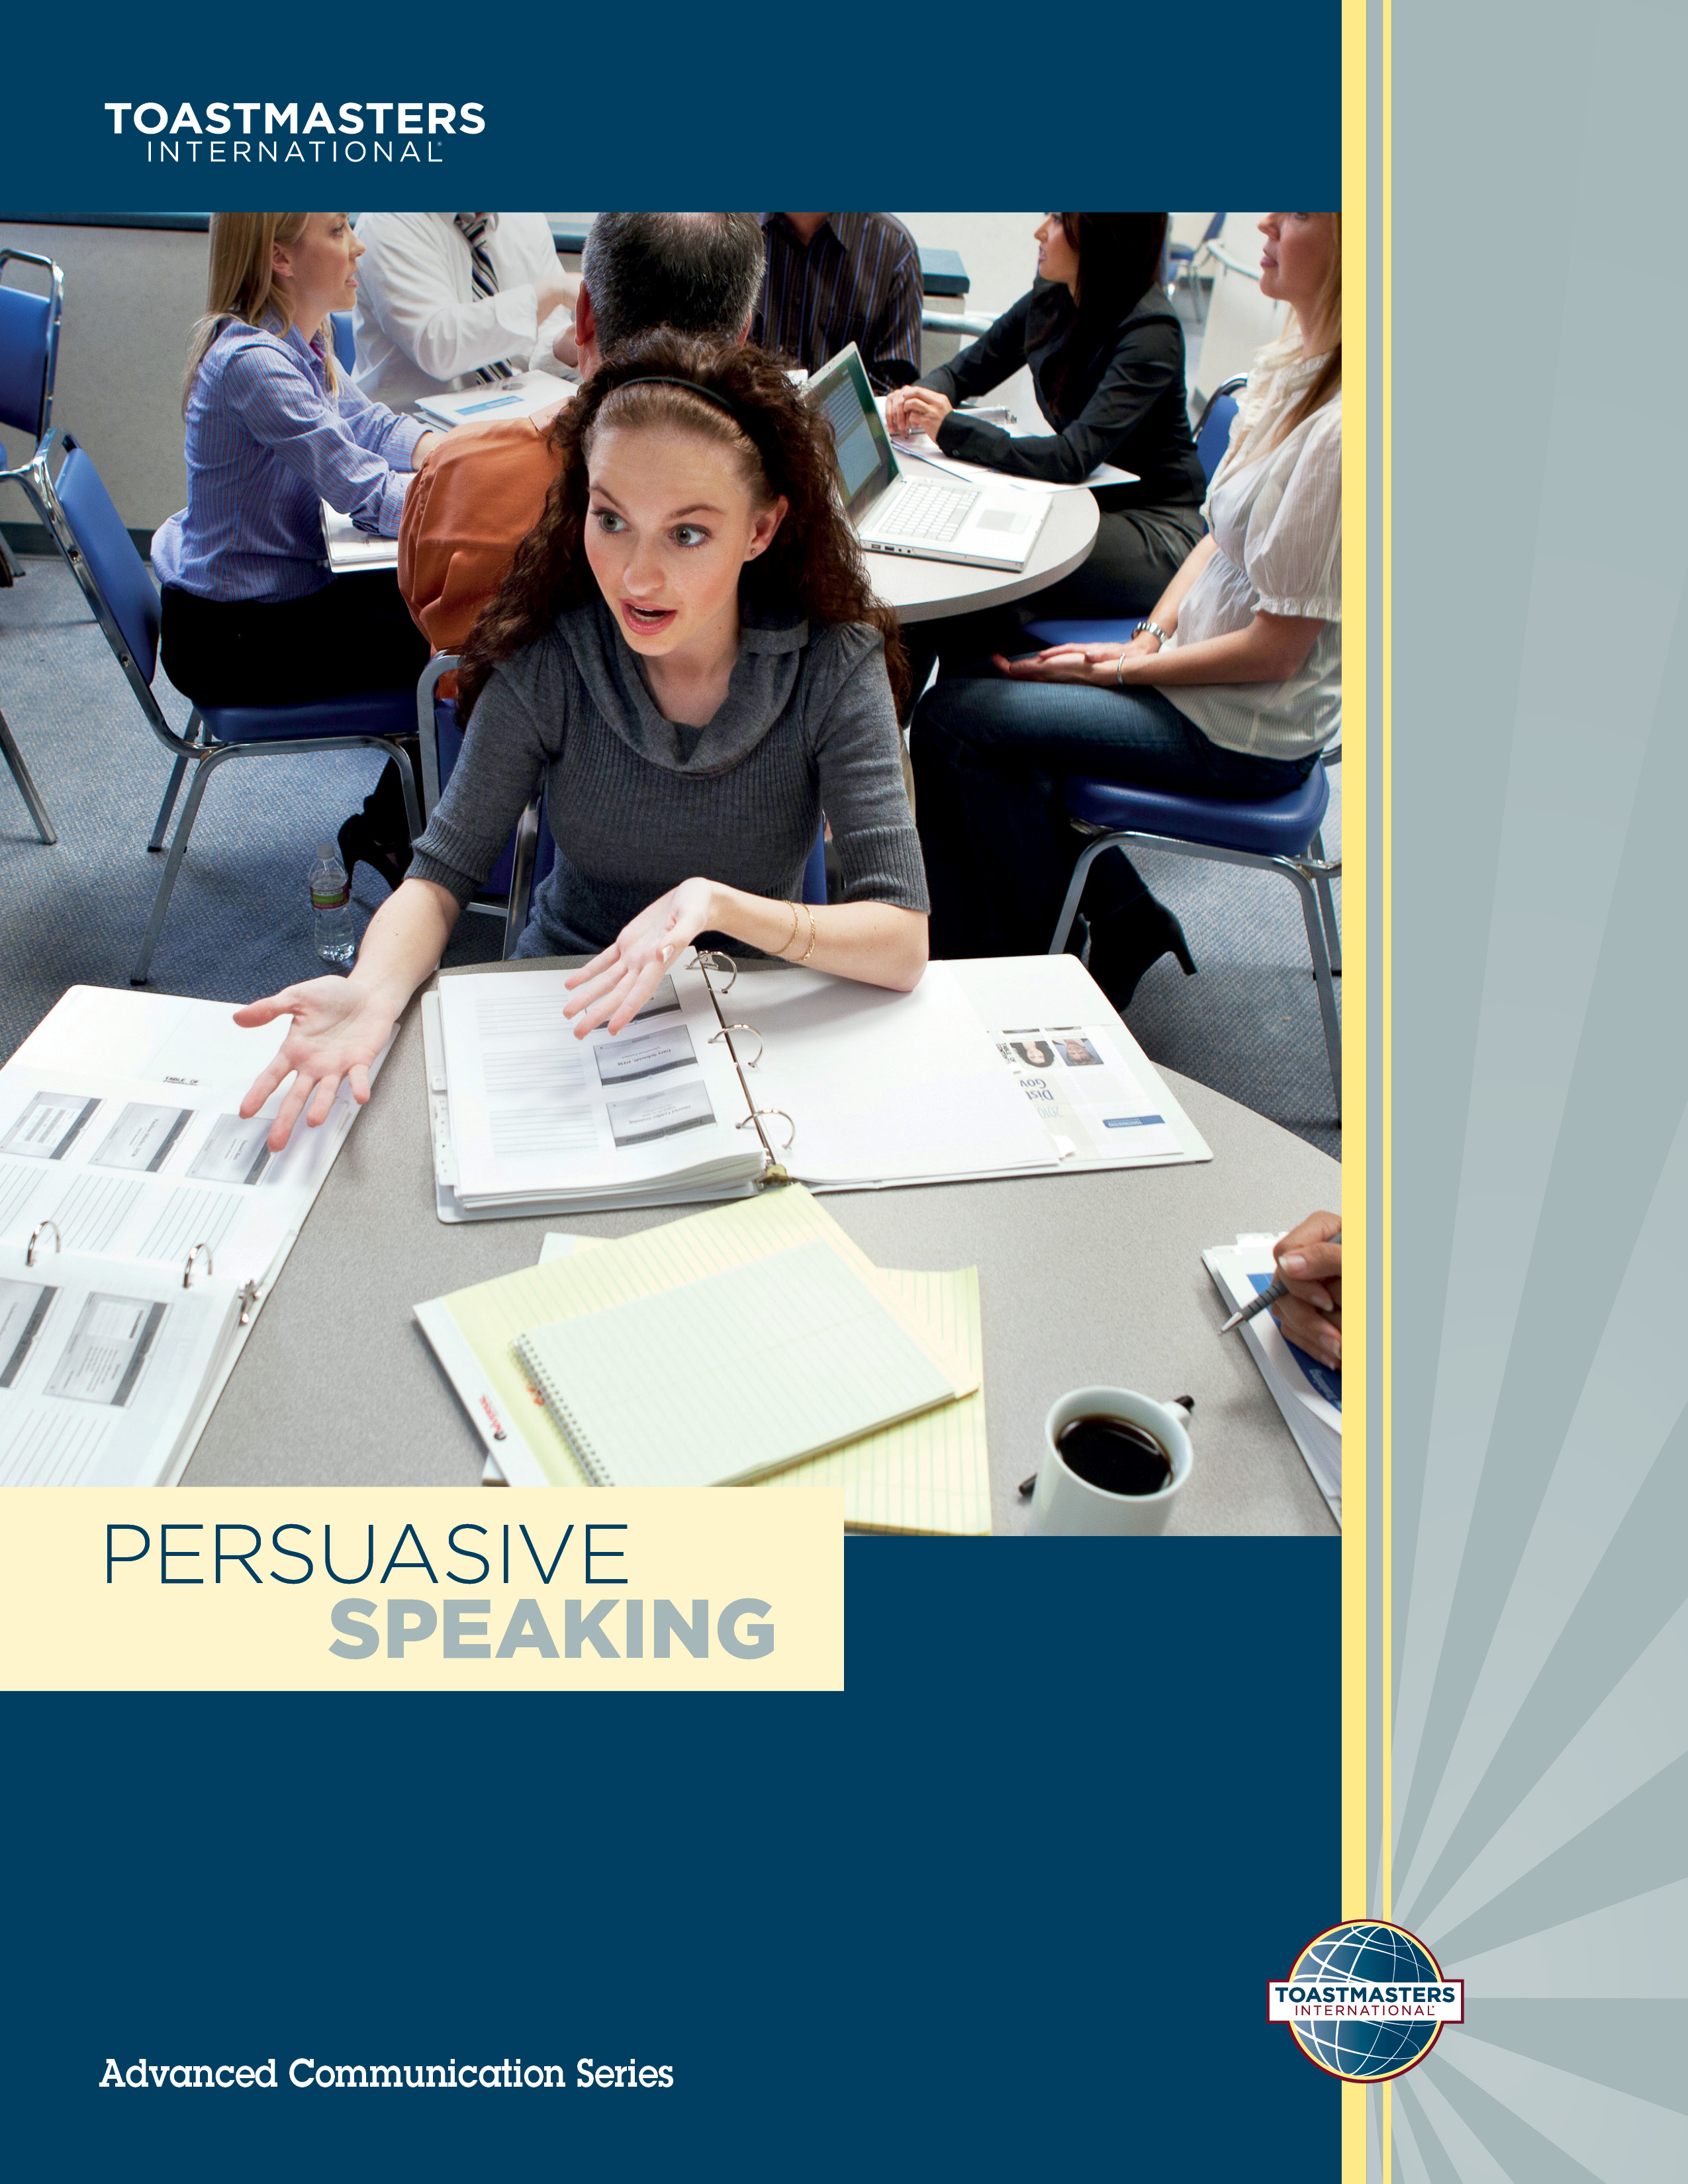 Cover of the "Persuasive Speaking" advanced manual